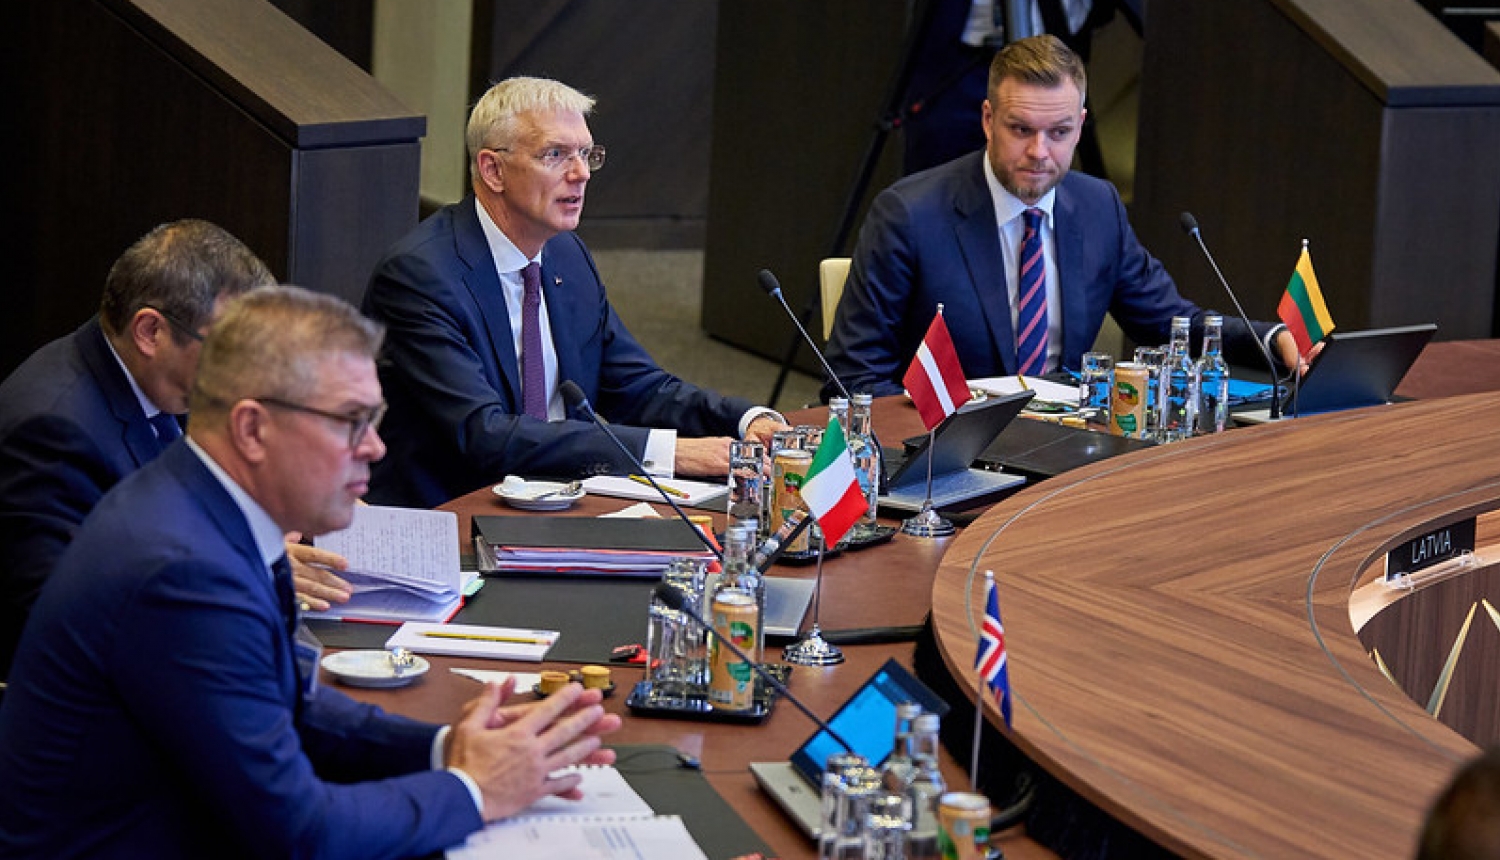 Krišjānis Kariņš takes part in the meeting of NATO Ministers of Foreign Affairs